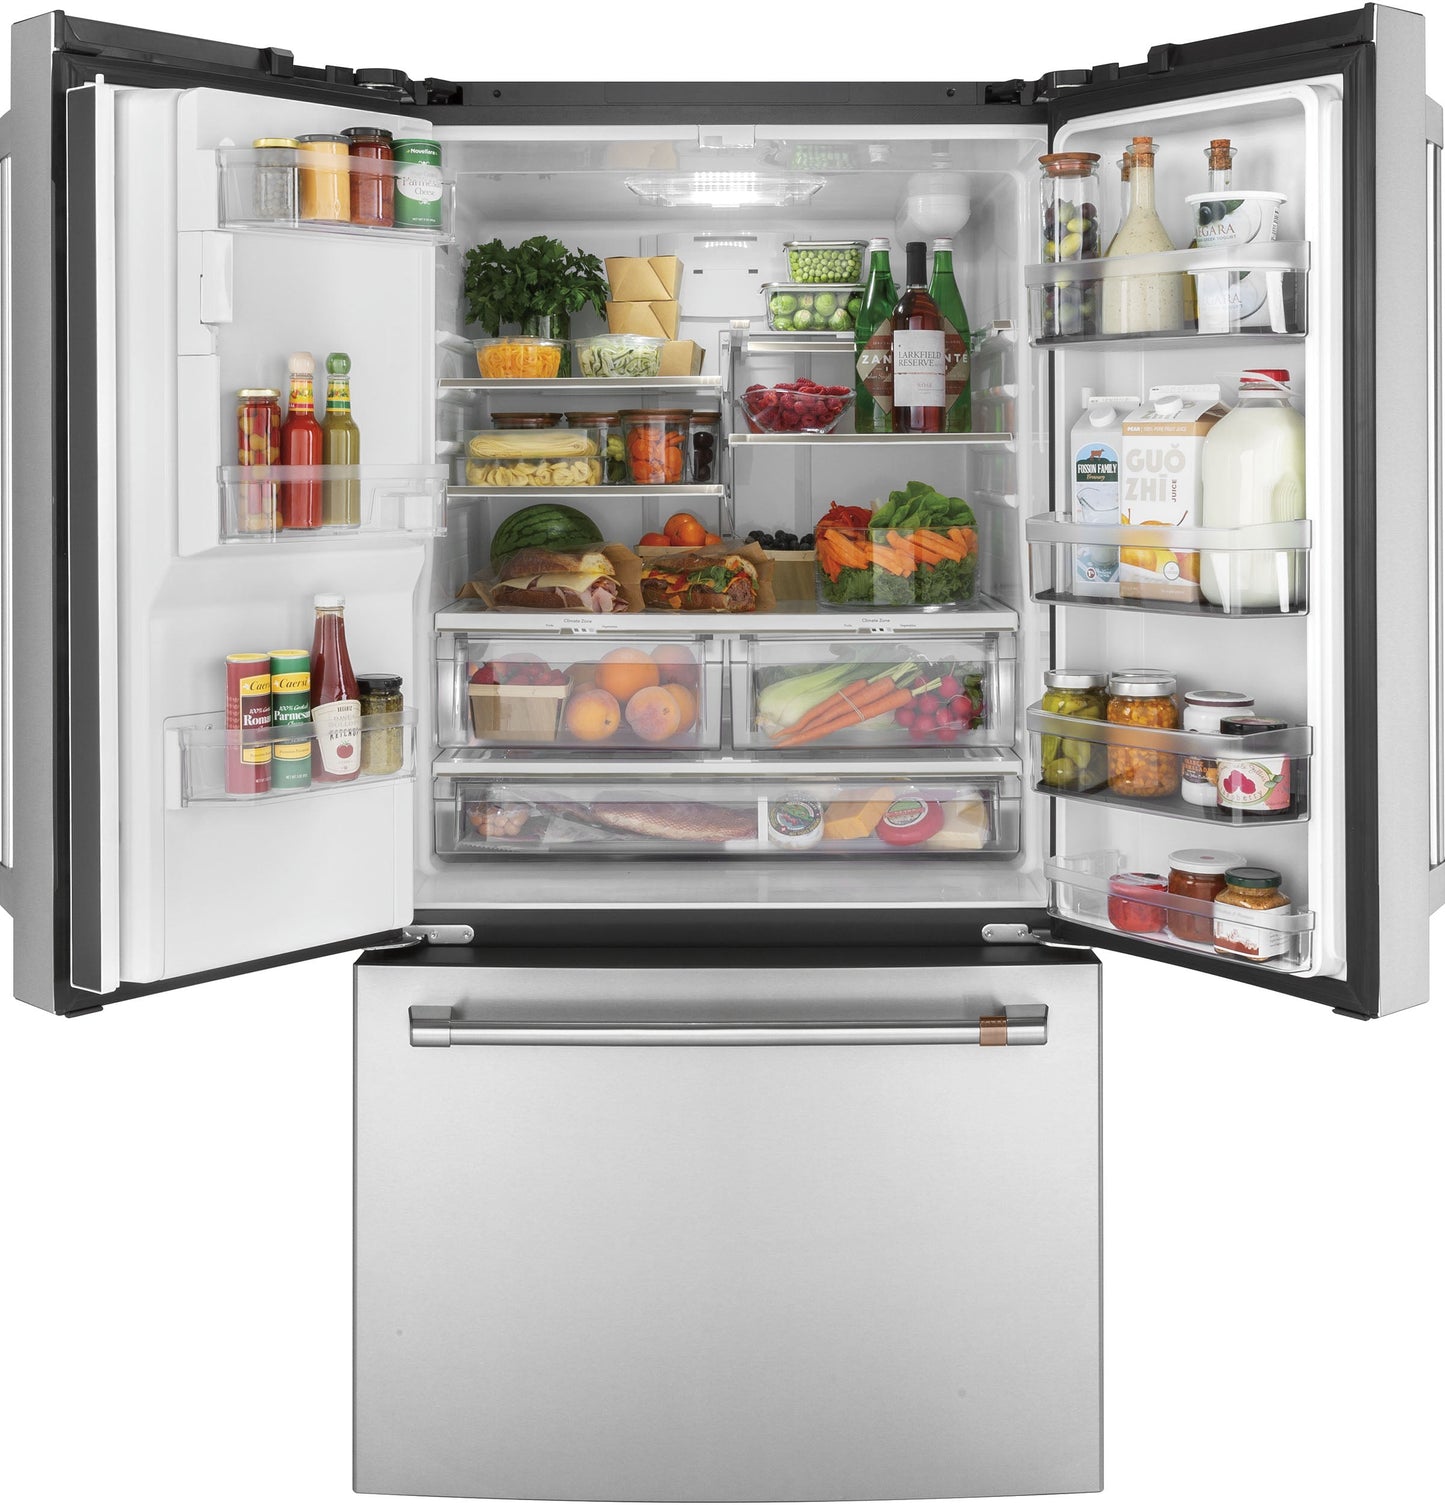 Café 25.6 Cu. Ft. French-Door Refrigerator Stainless Steel - CFE26KP2NS1